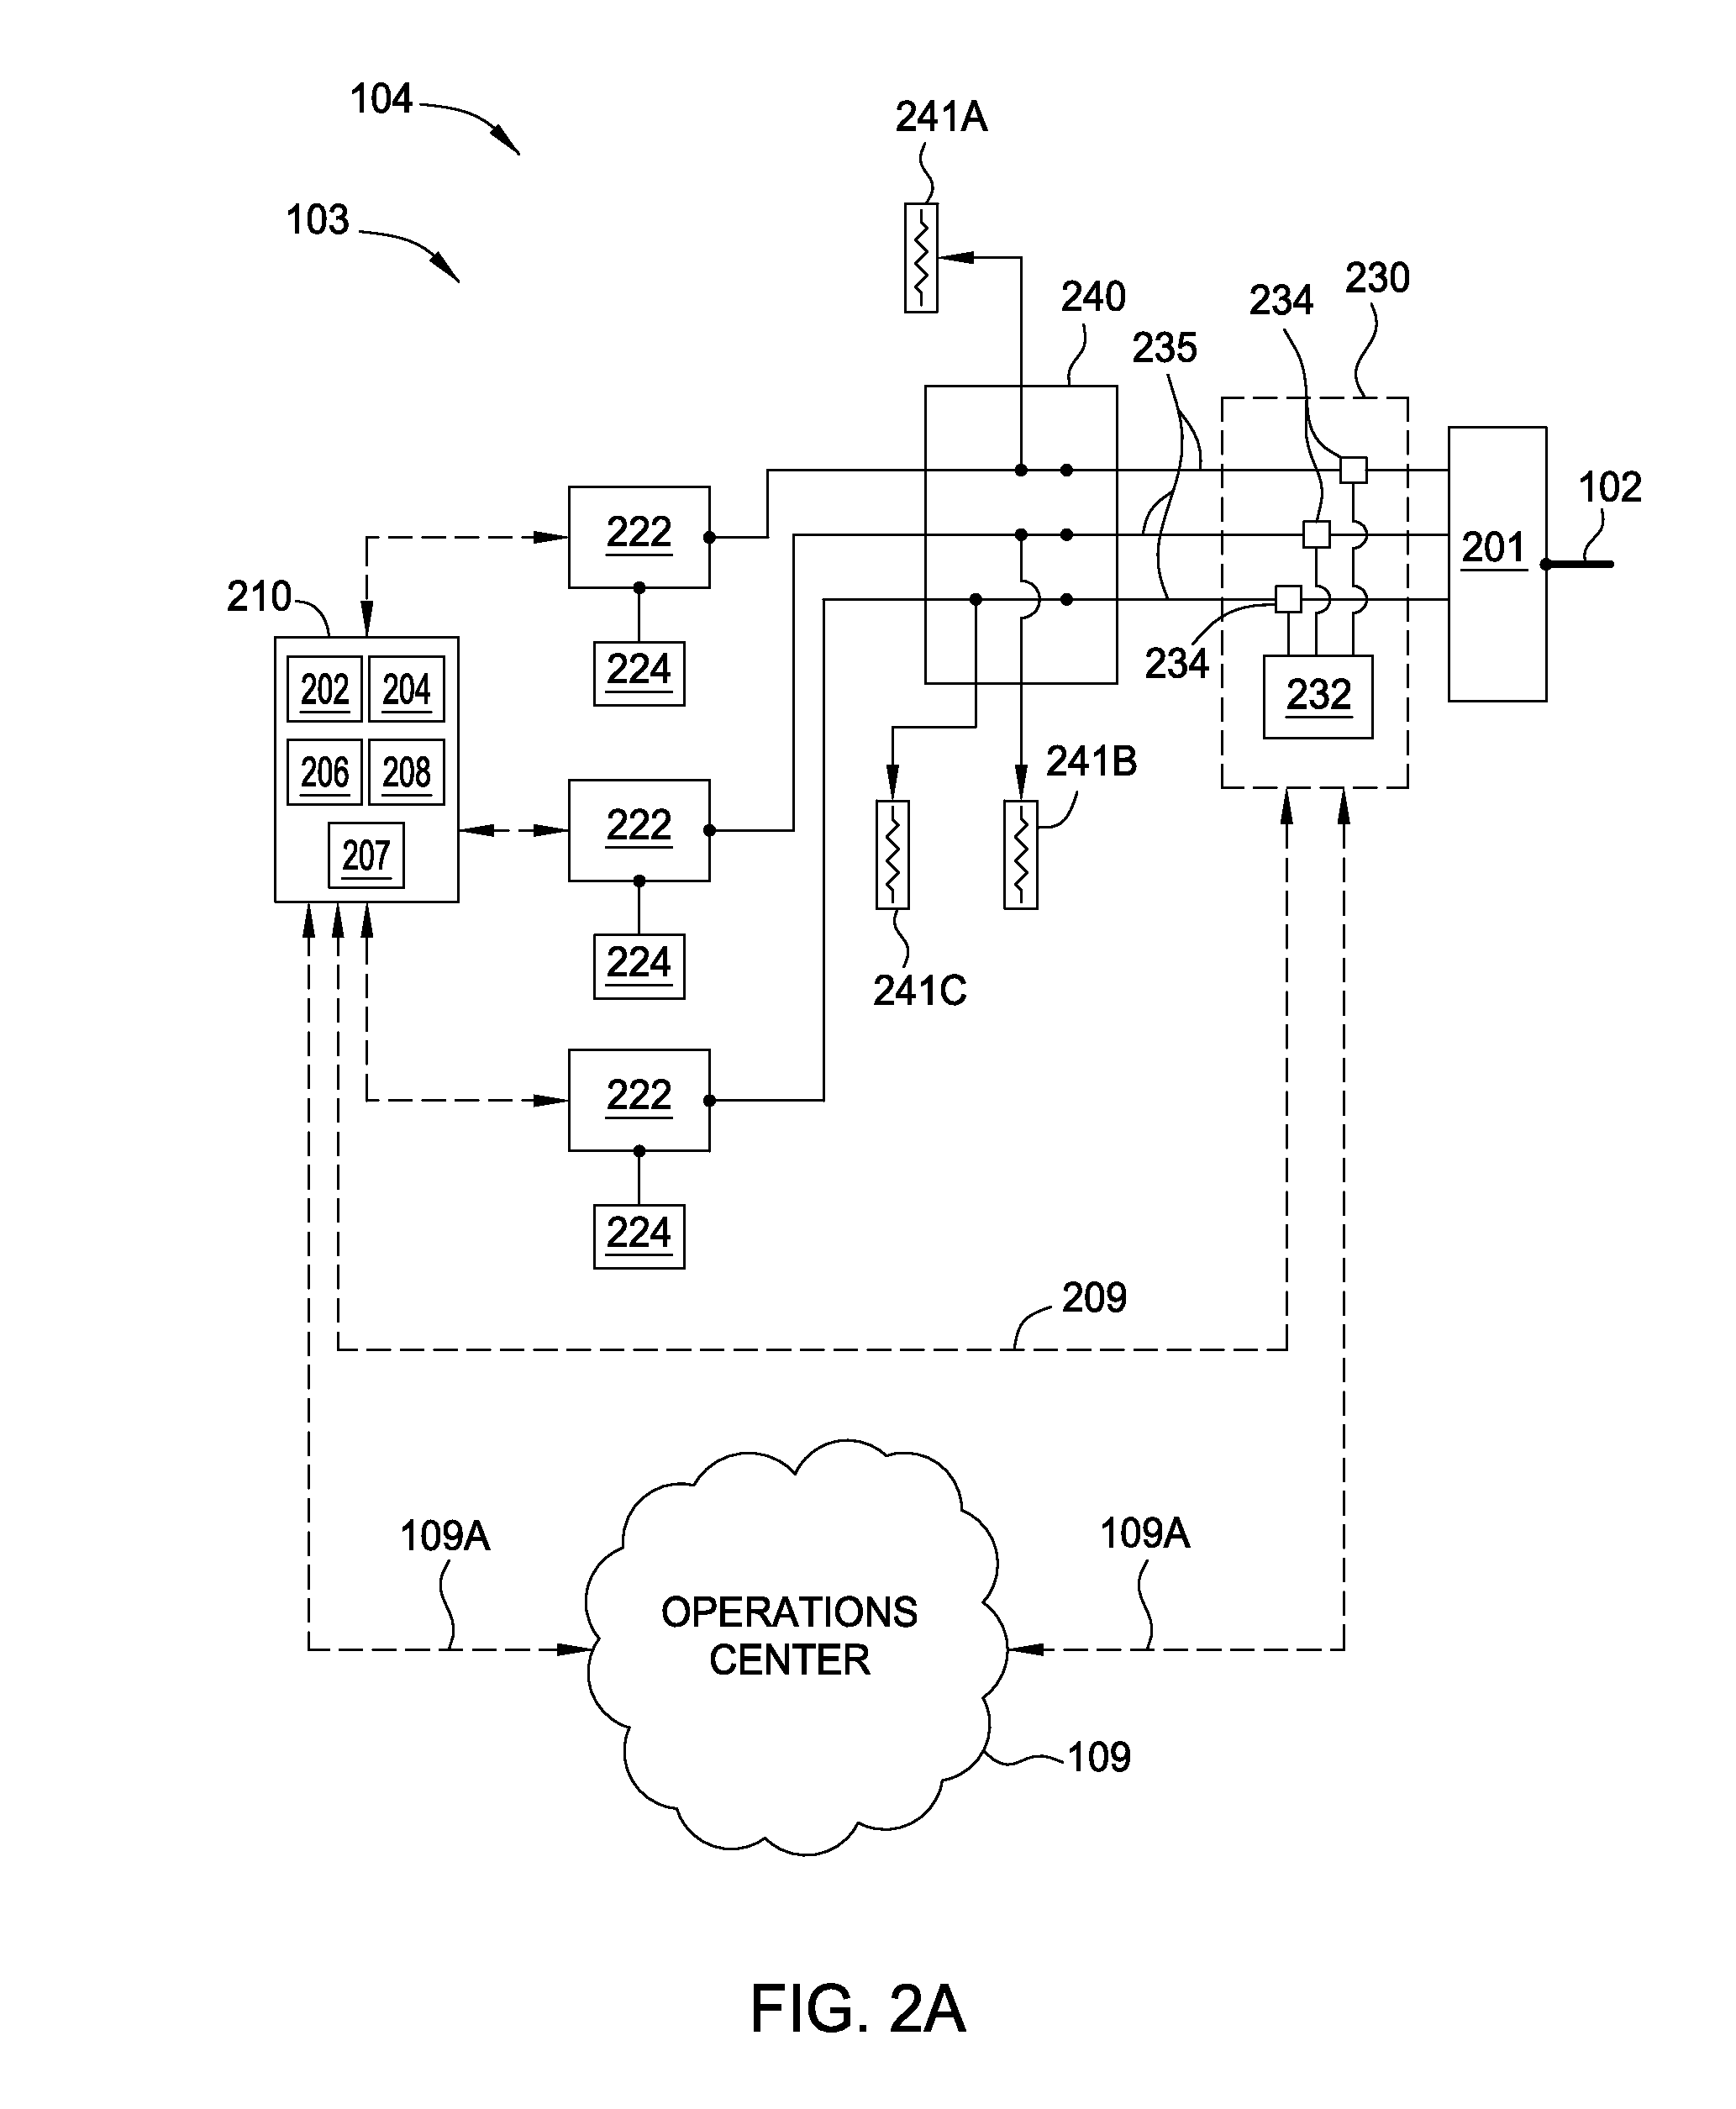 Method and apparatus for automatically reconfiguring multi-phased networked energy storage devices at a site